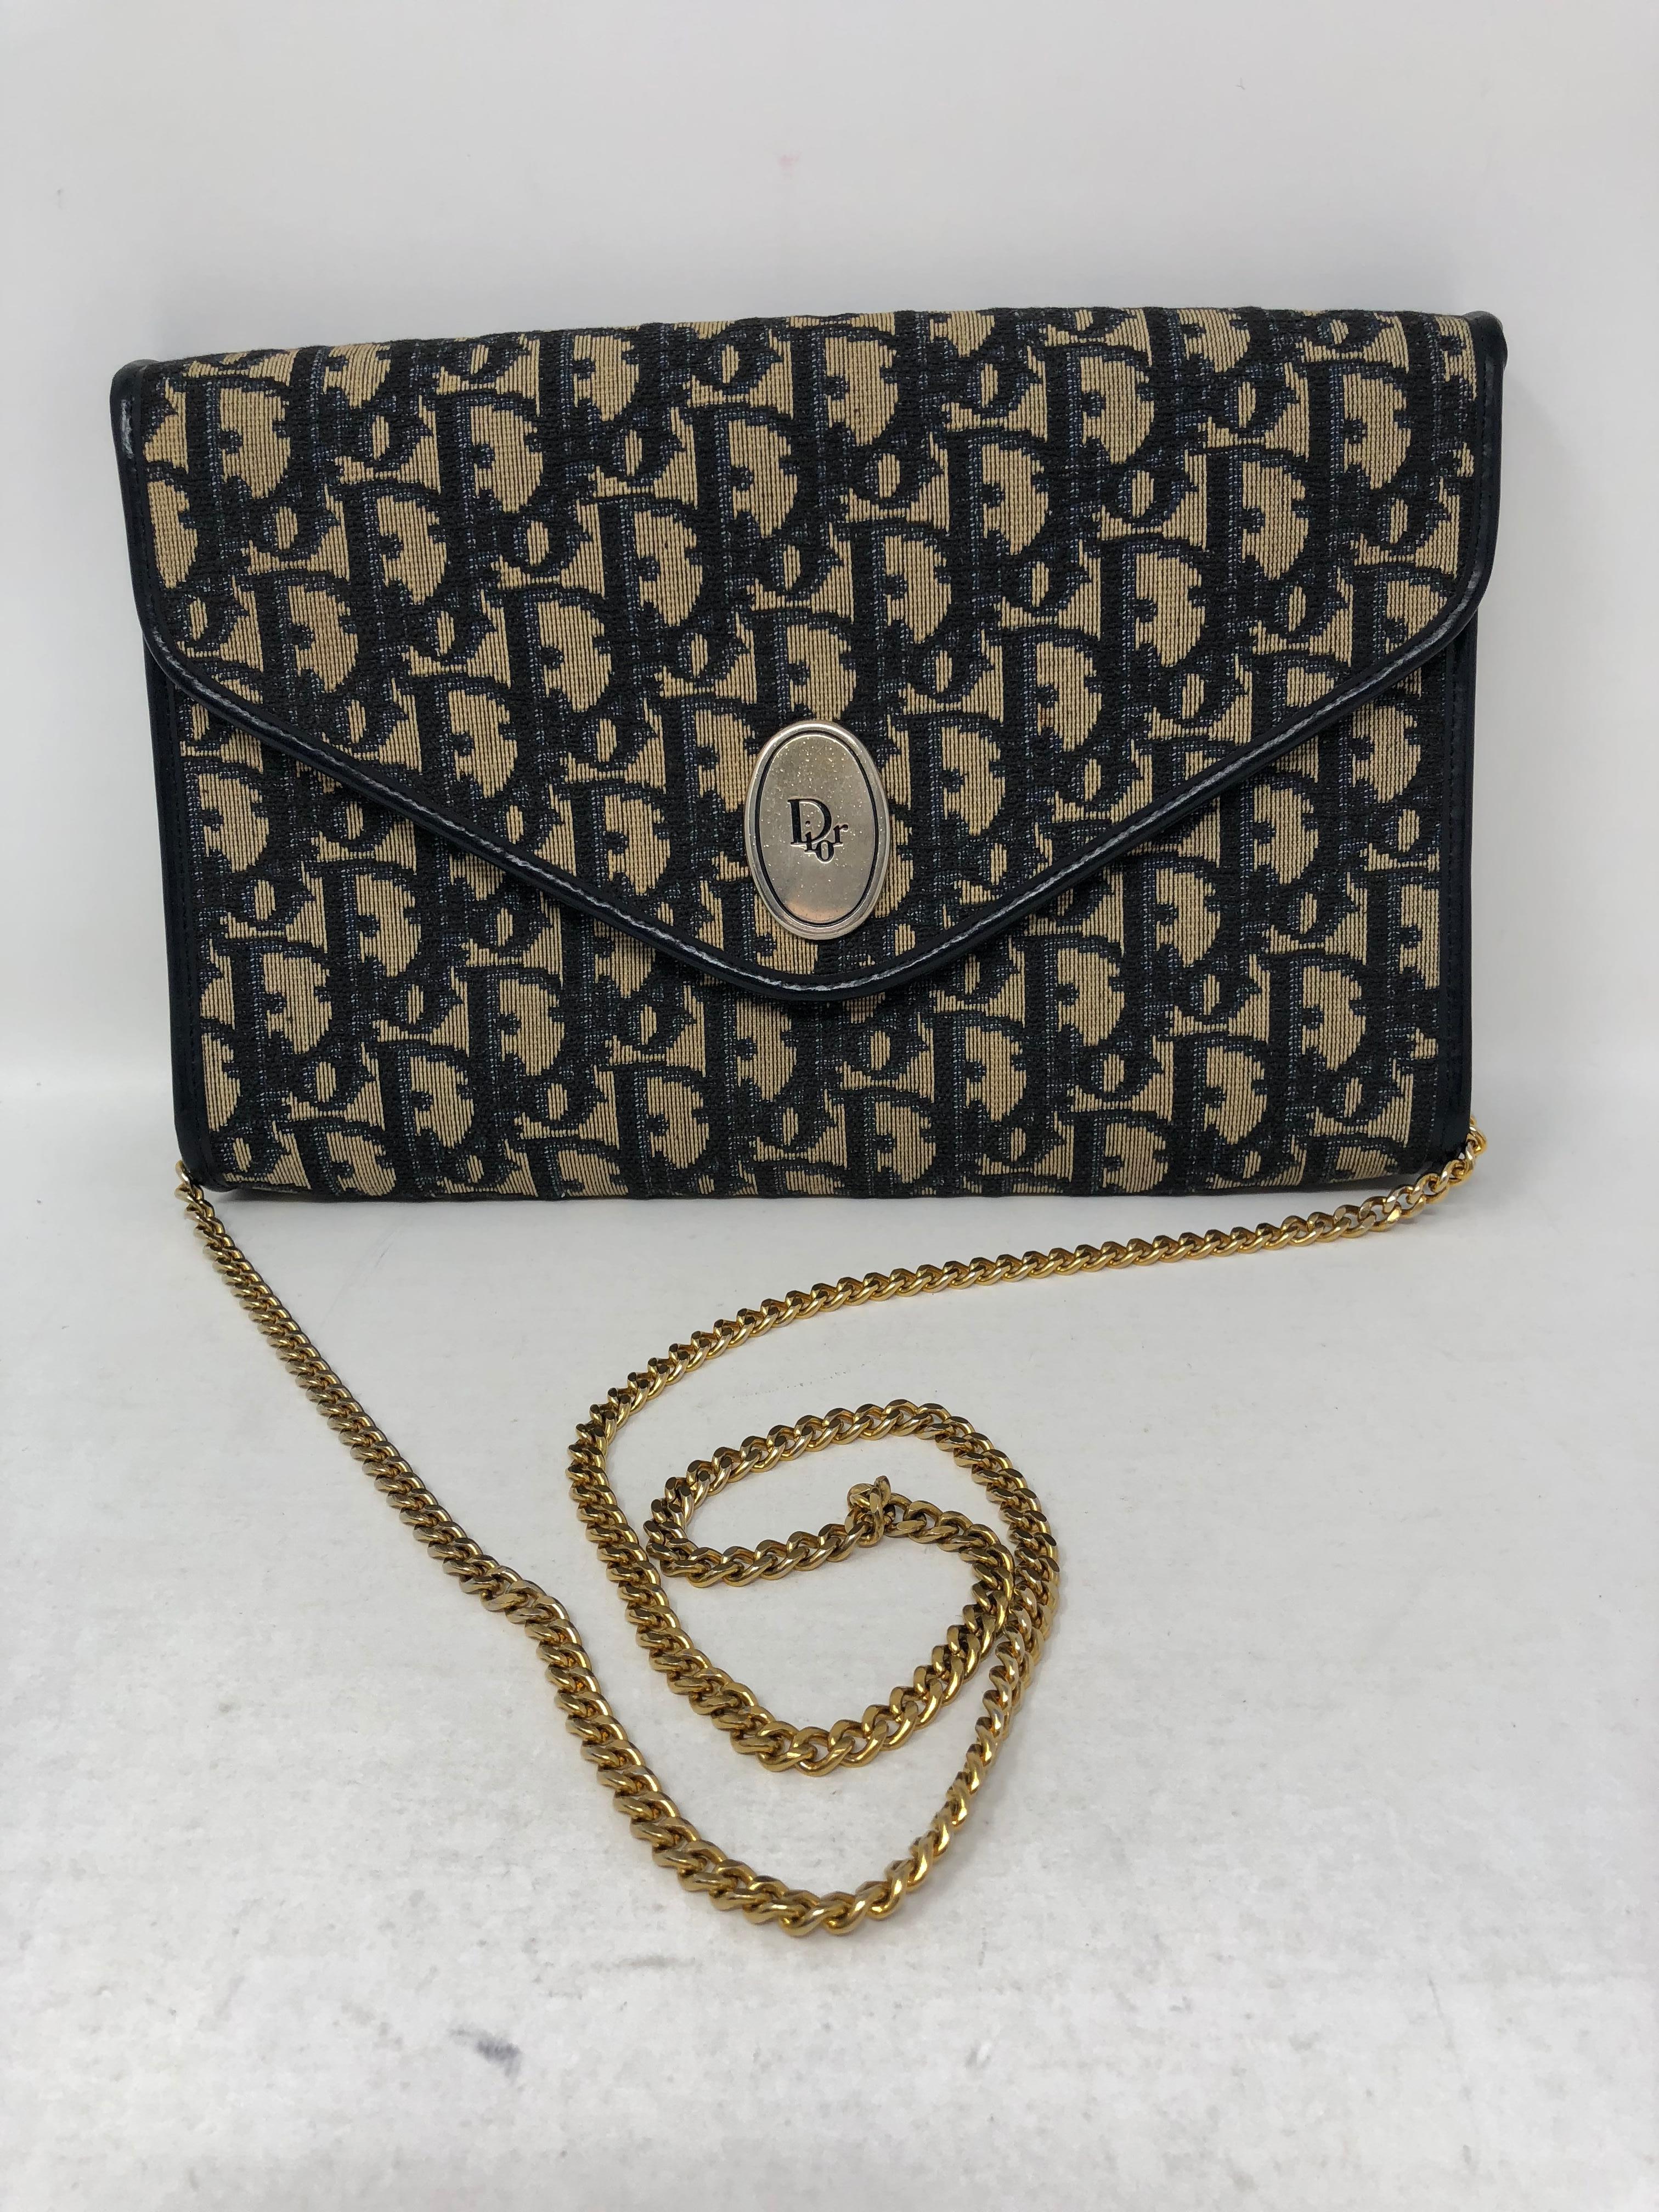 Dior Clutch/ Crossbody in monogram navy with leather trim. Gold chain. Vintage and highly collected Dior. Good condition. Guaranteed authentic. 